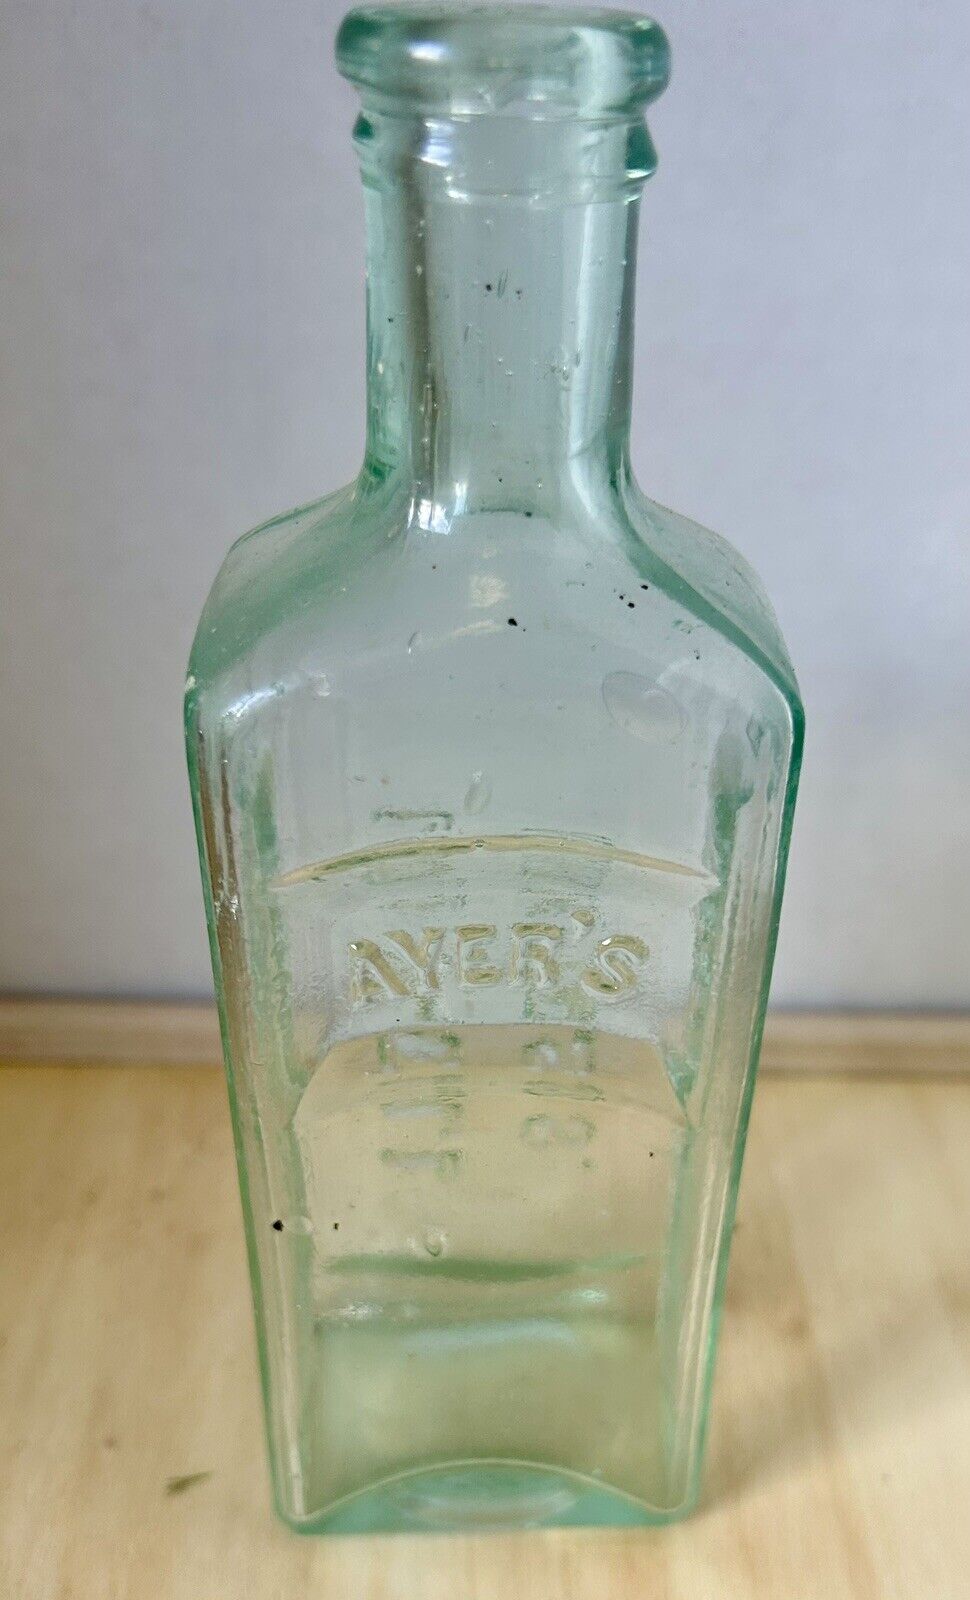 Ayer\'s Cherry Pectoral Lowell Mass Bottle 1800s P3 Green 7 in x 2 in